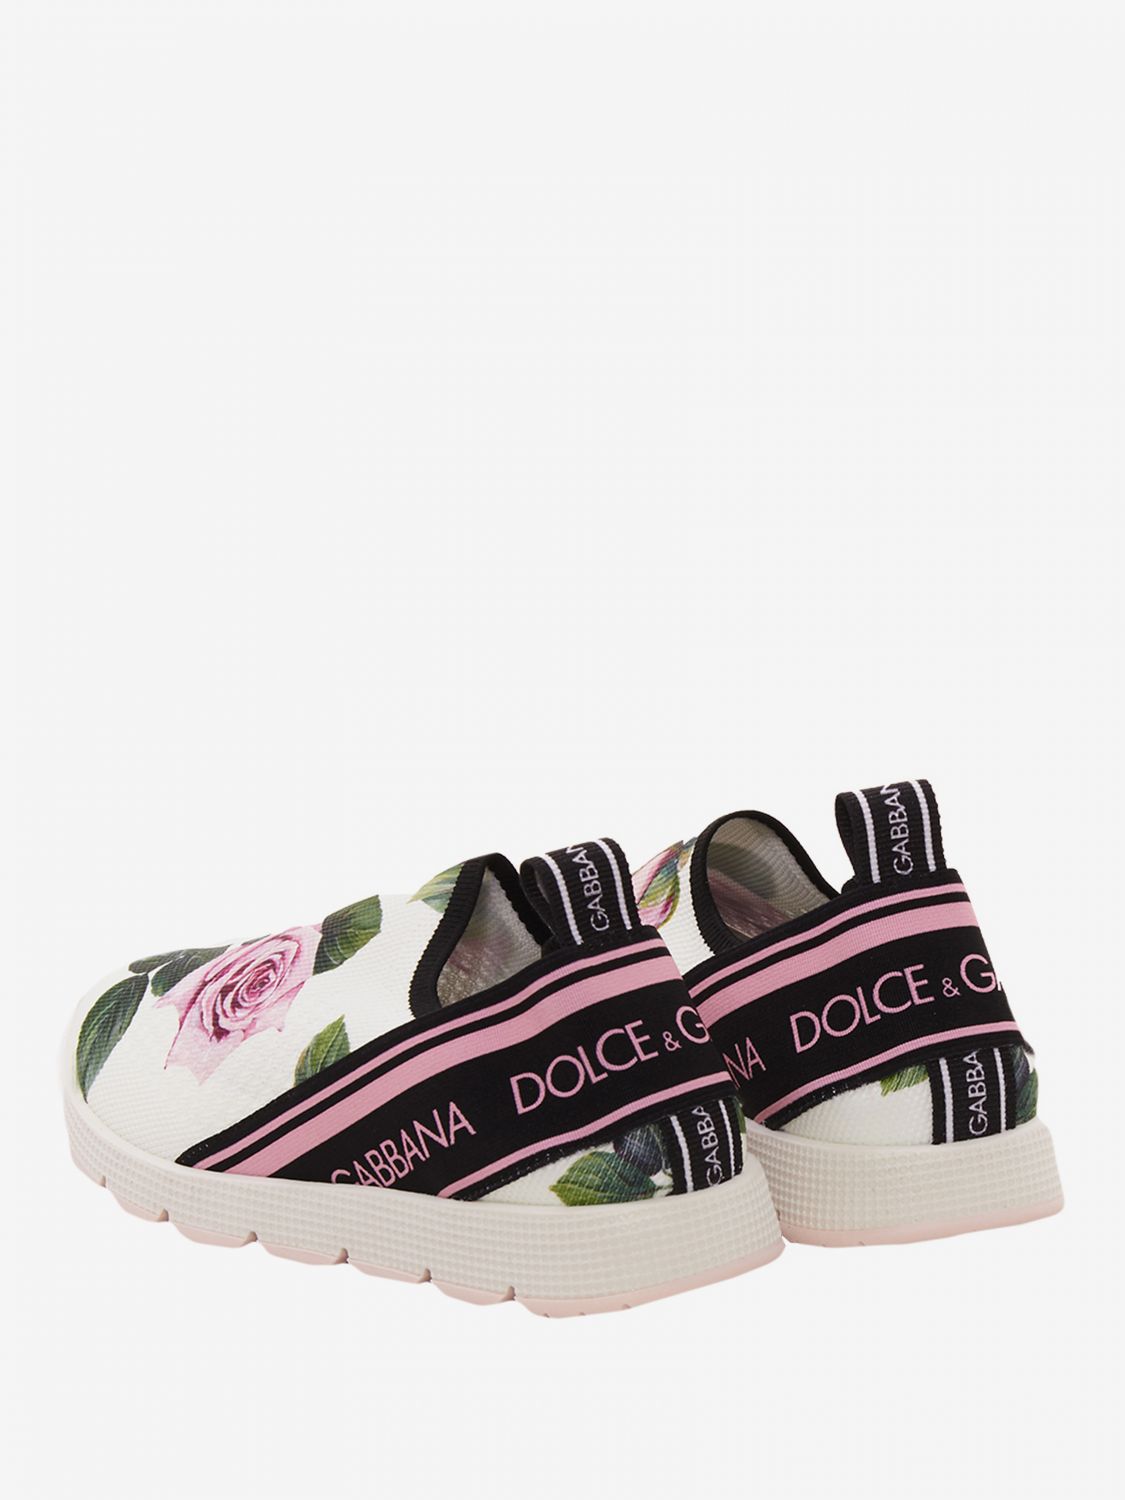 dolce and gabbana shoes for babies